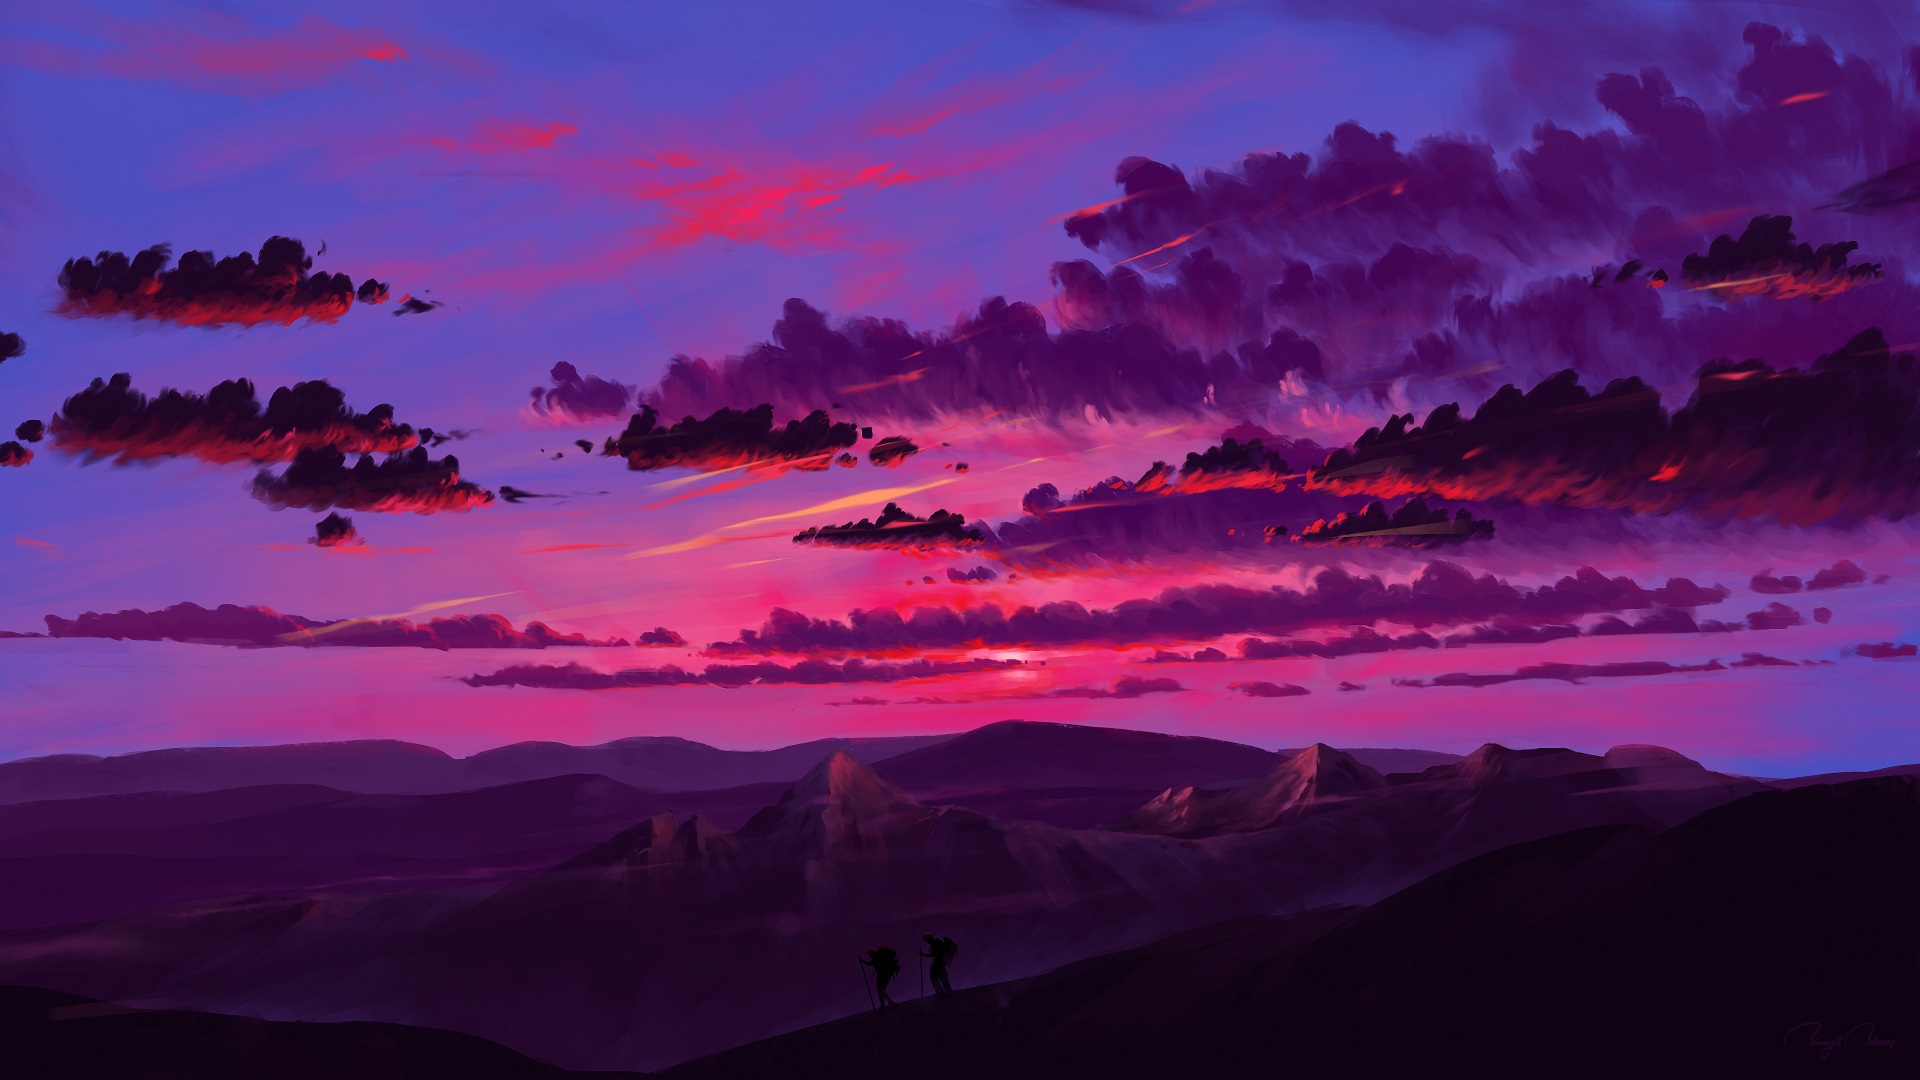 Digital Painting Landscape Mountains Sunset Sky Clouds BisBiswas 1920x1080